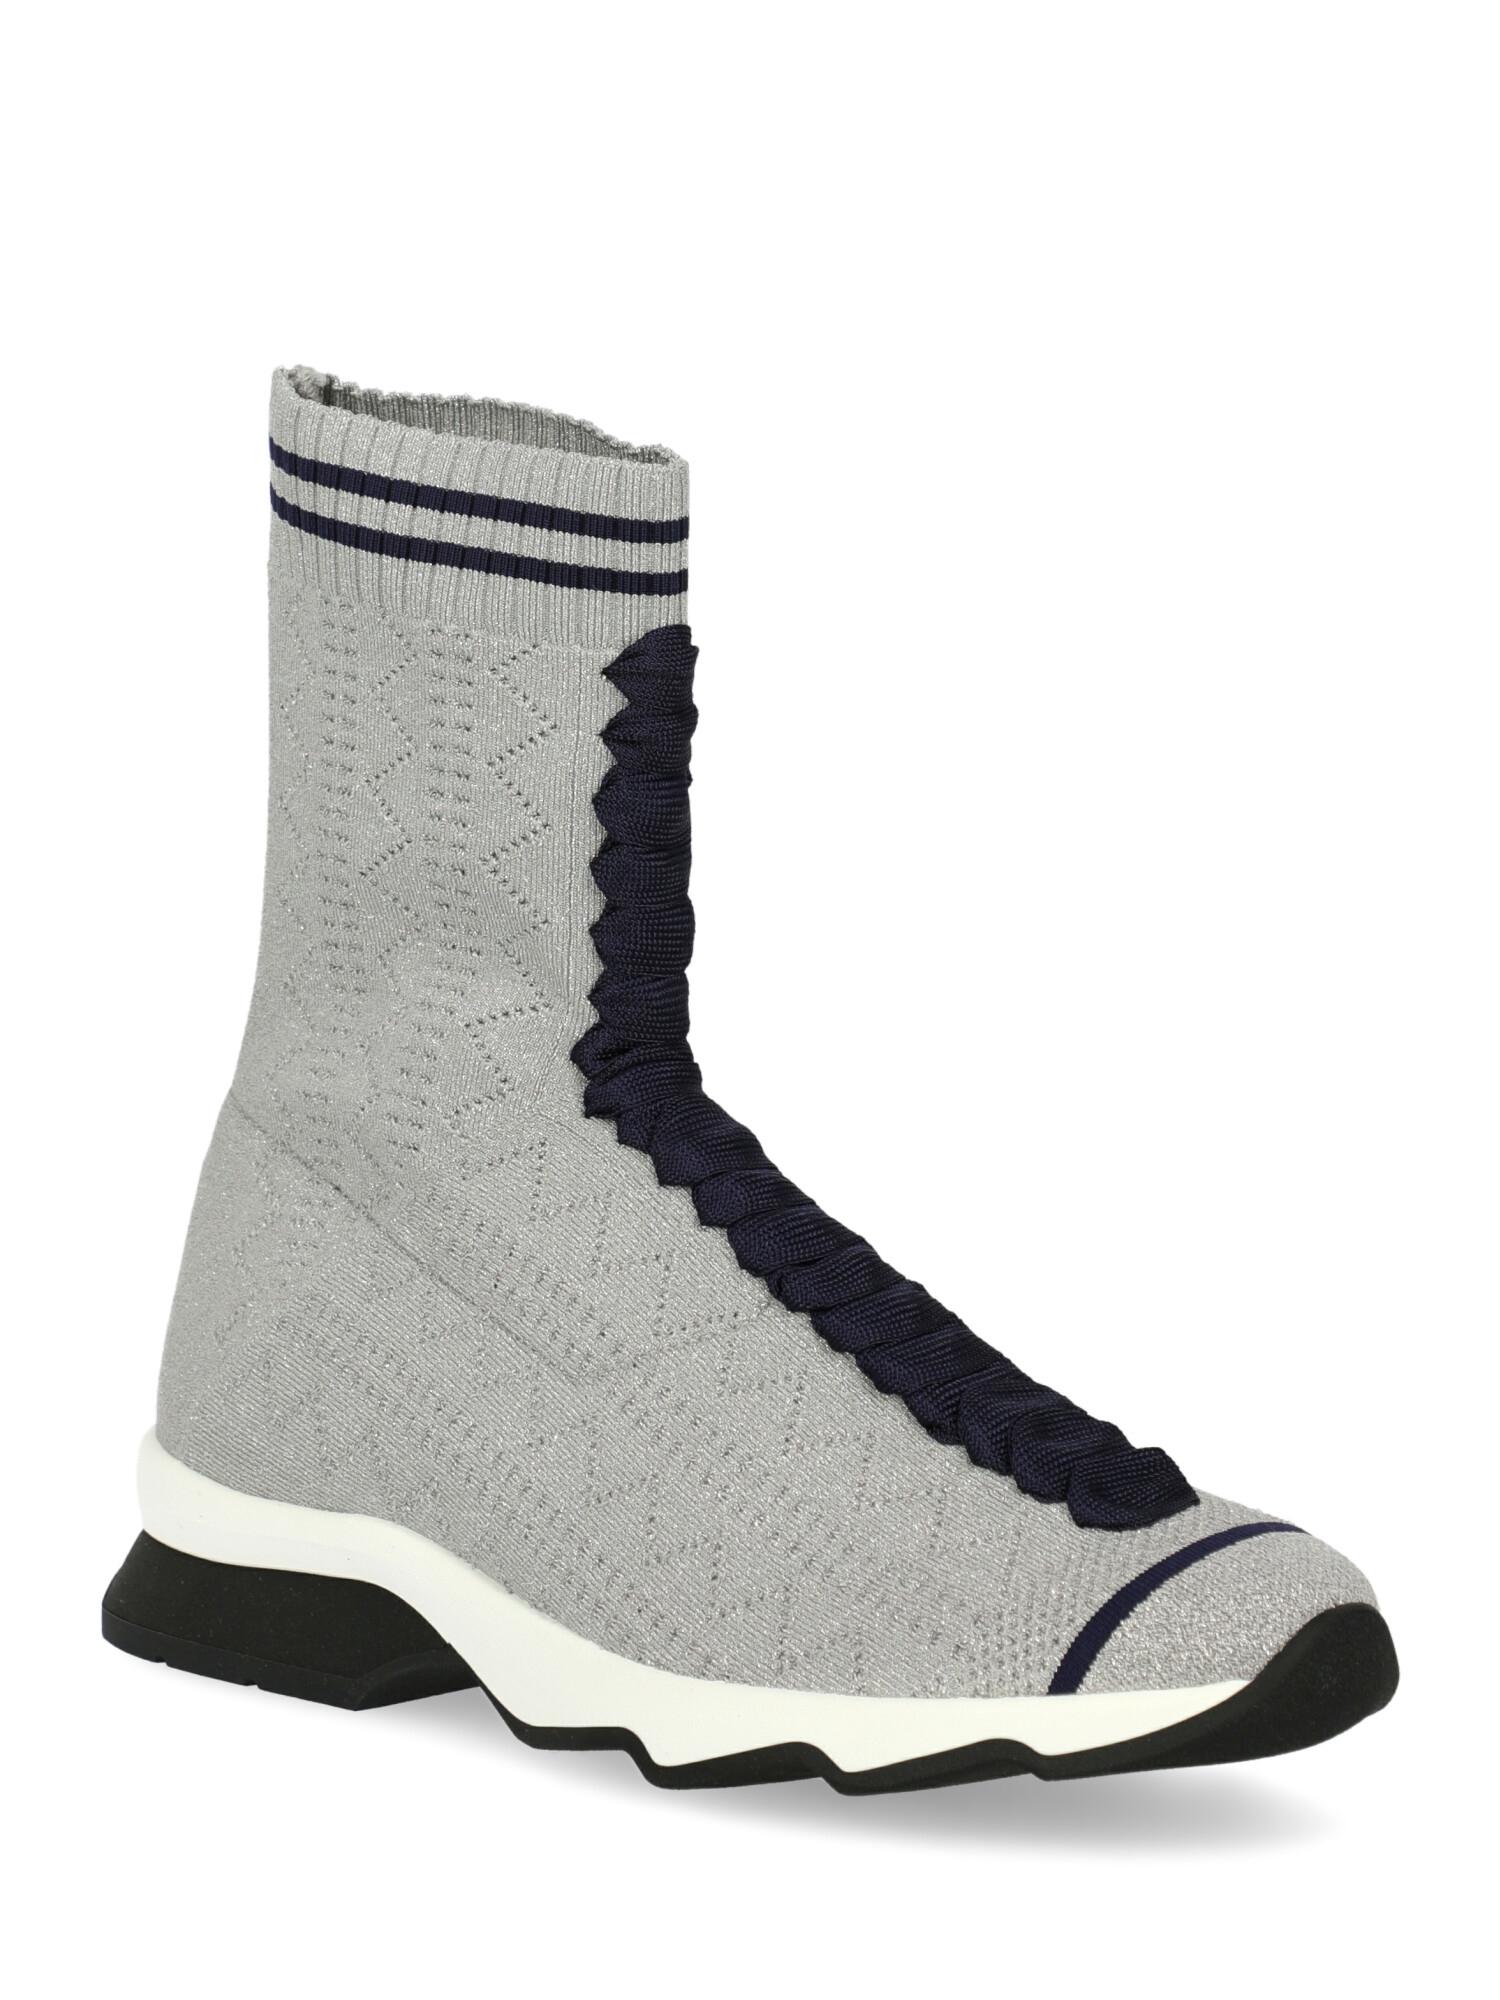 Shoe, fabric, solid color, metallic effect, sock sneakers, knitted, no fastening, contrasting applications

Includes:
- Dust bag
- Box

Product Condition: New With Tag

Composition:
Upper: 100% Synthetic
Sole: 100% Rubber

Color: Silver
Product ID: